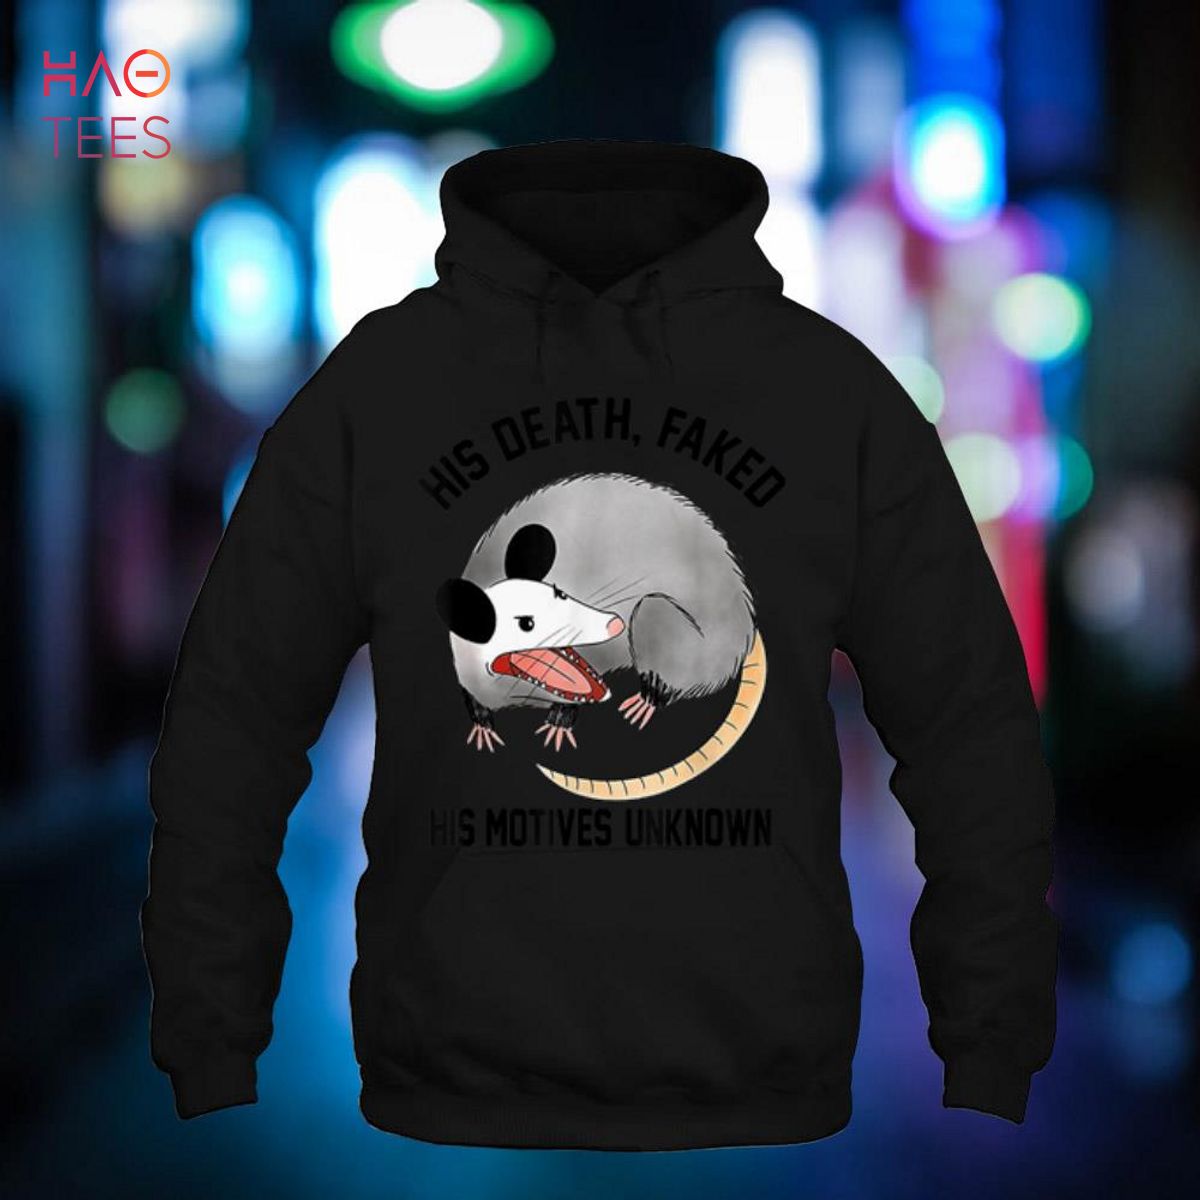 His Death, Faked His Motives, Unknown - Funny Possum Shirt